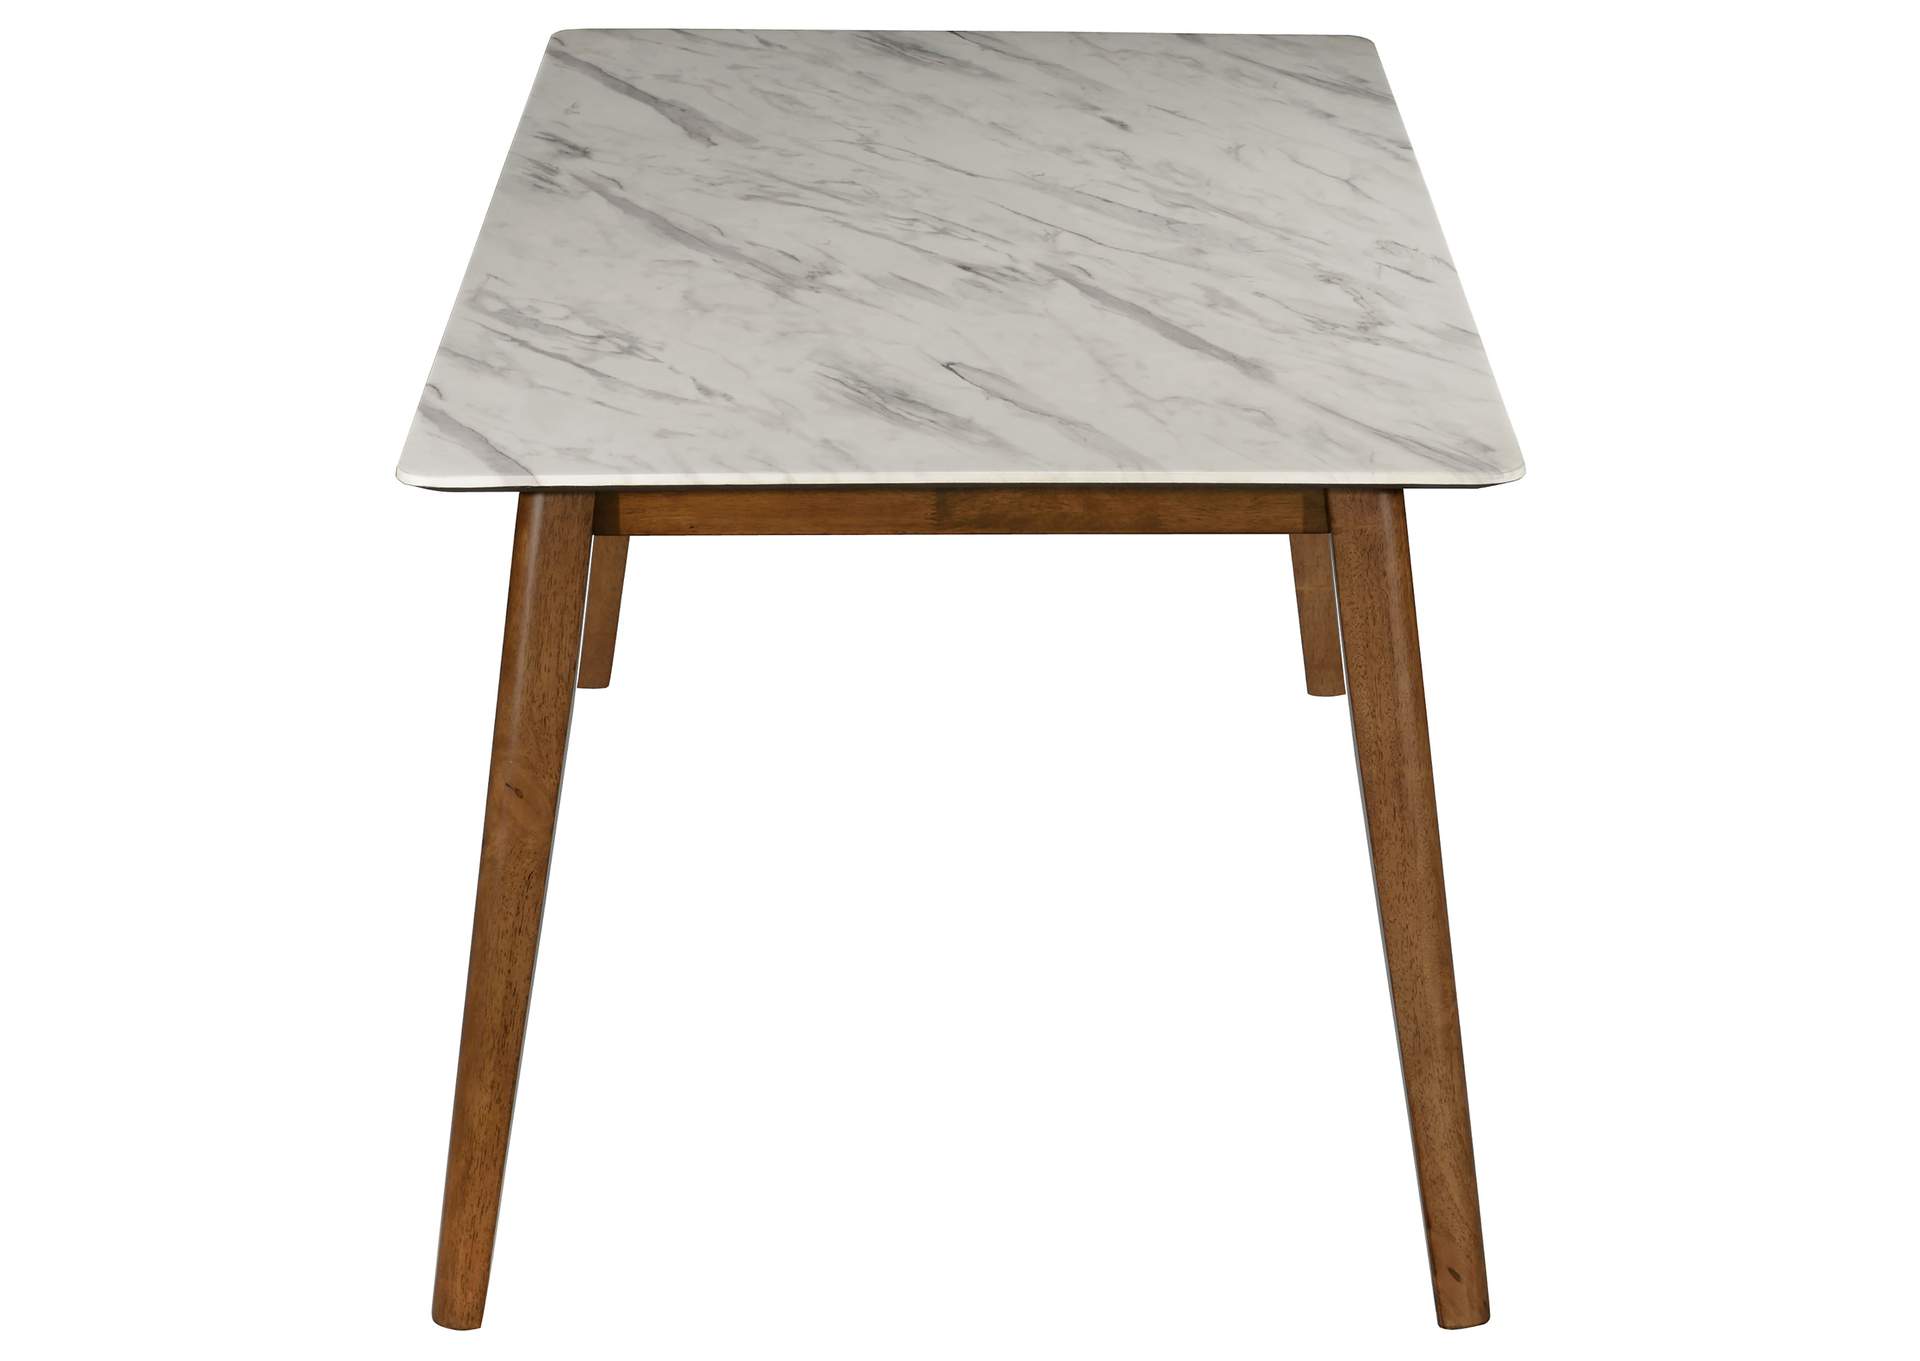 Everett Faux Marble Top Dining Table Natural Walnut and White,Coaster Furniture